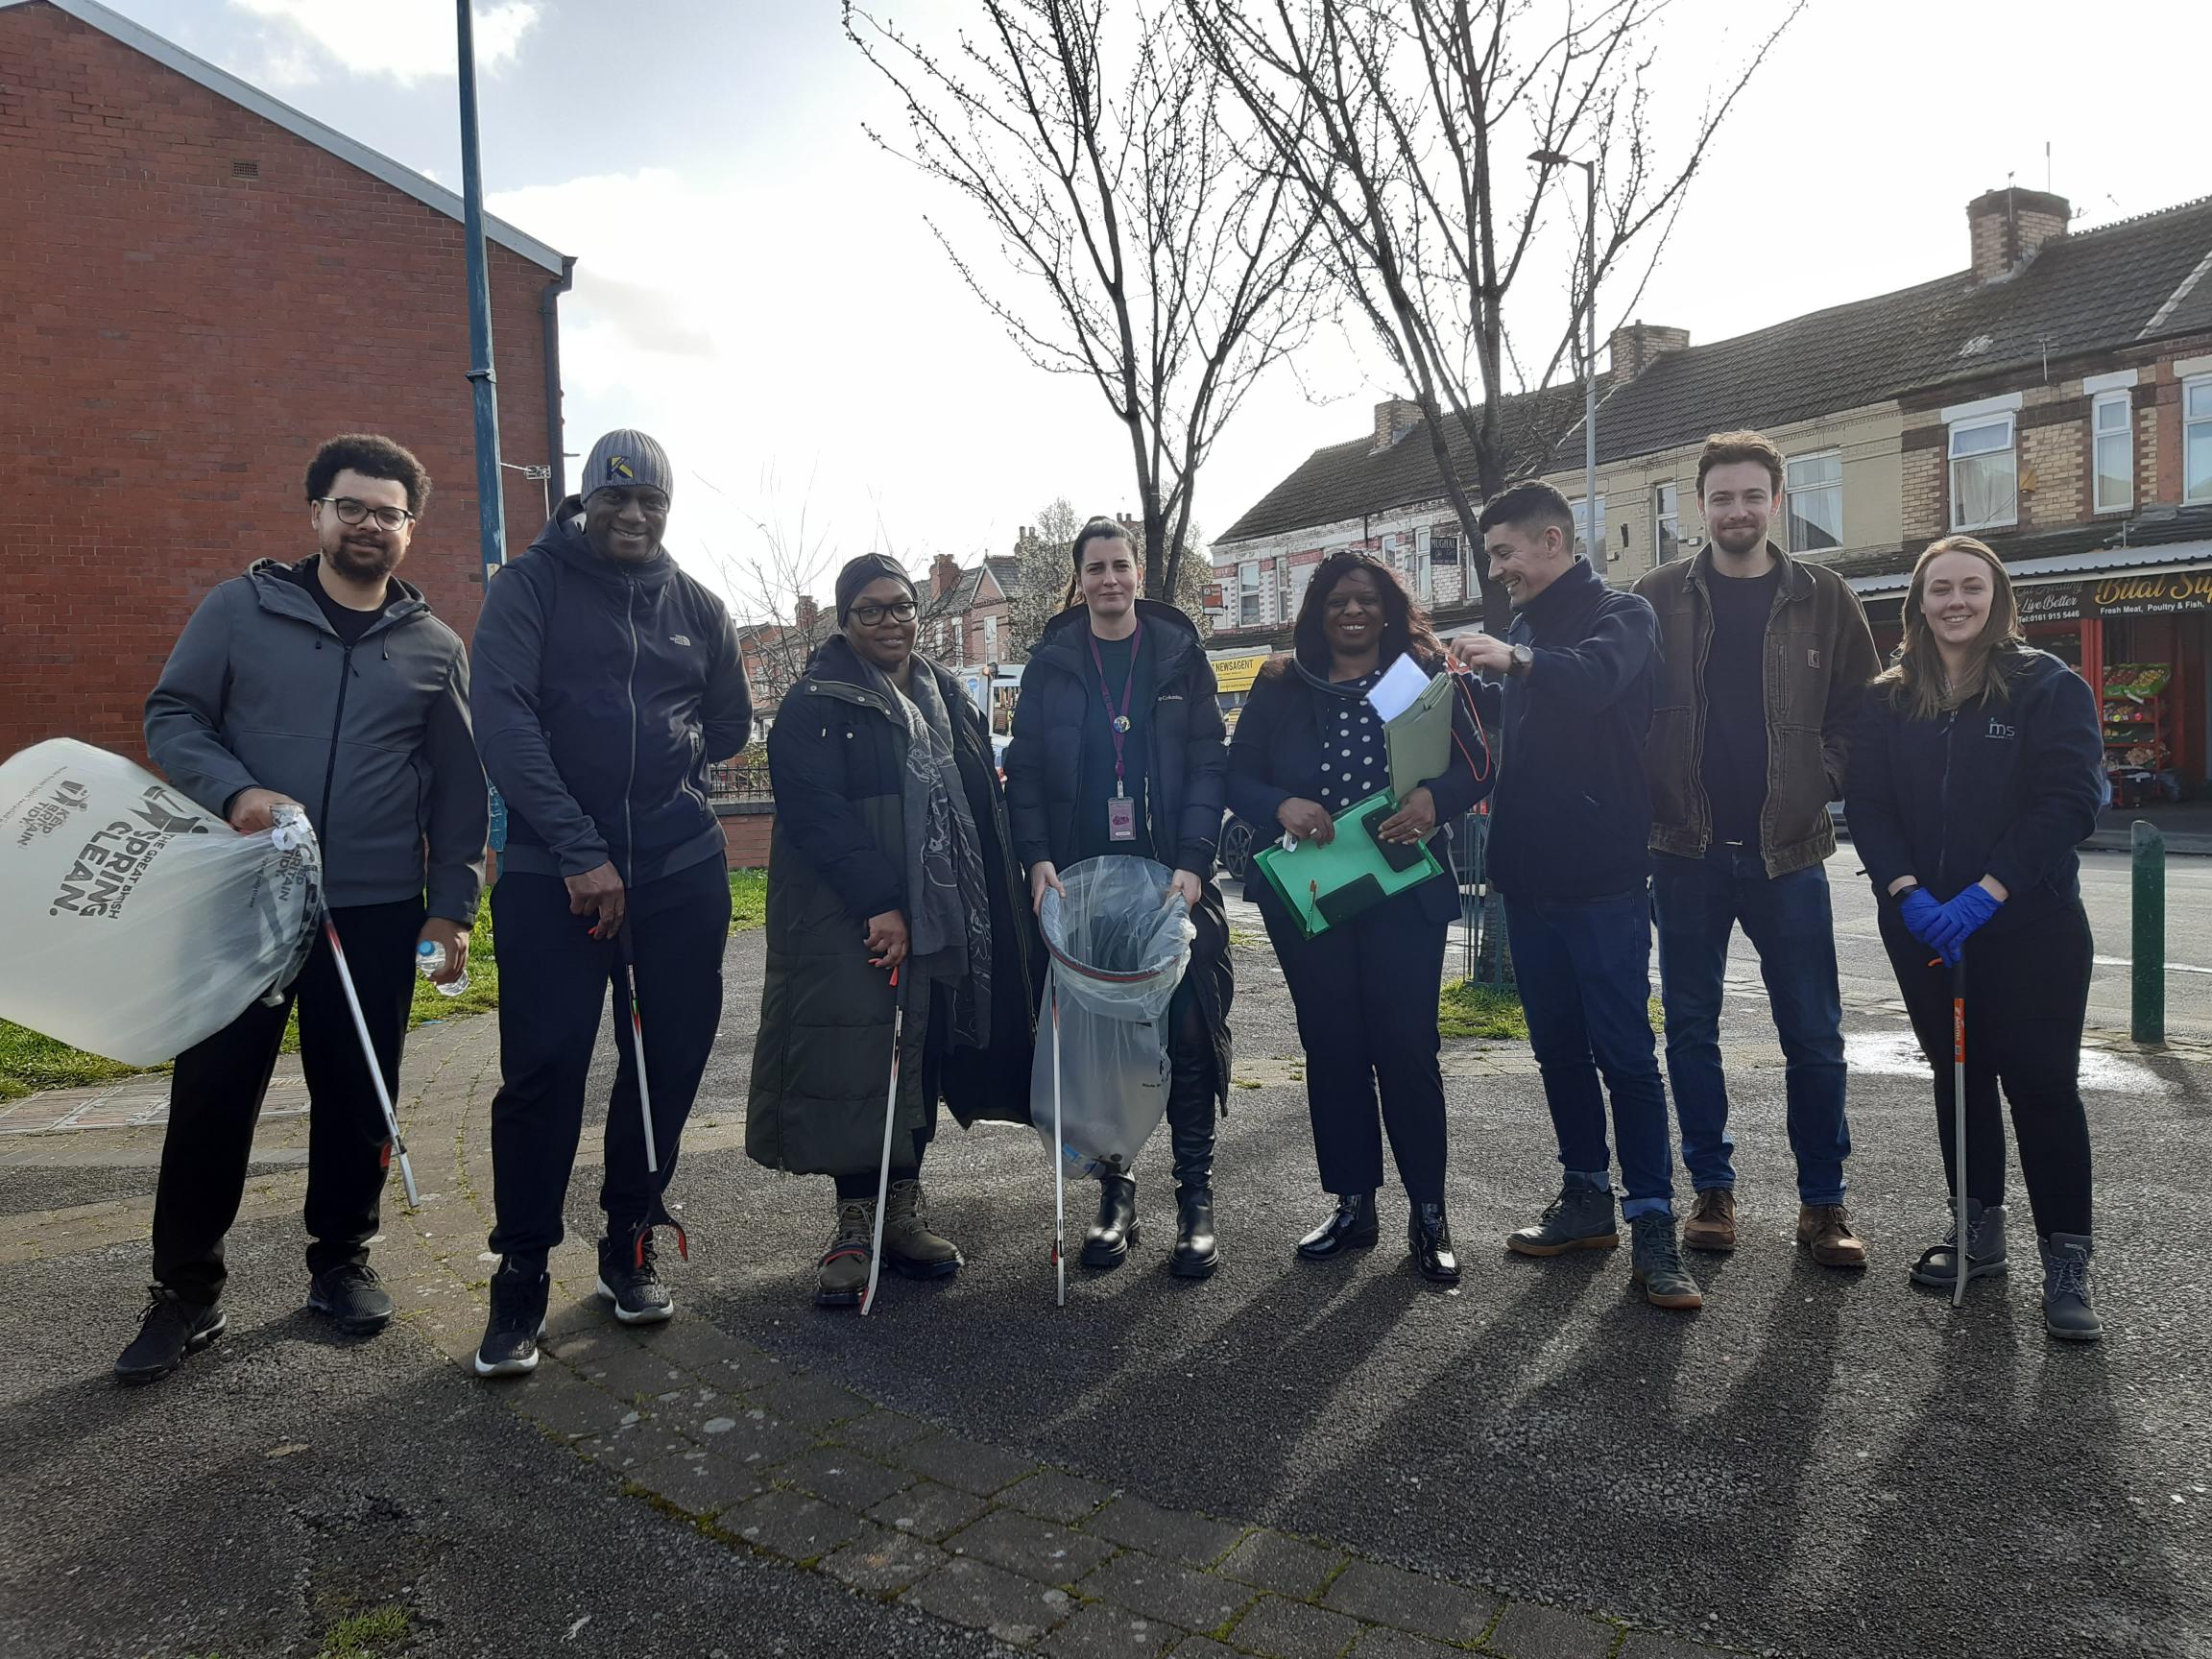 Moss Side residents meet up for spring clean holding bags and litter pickers